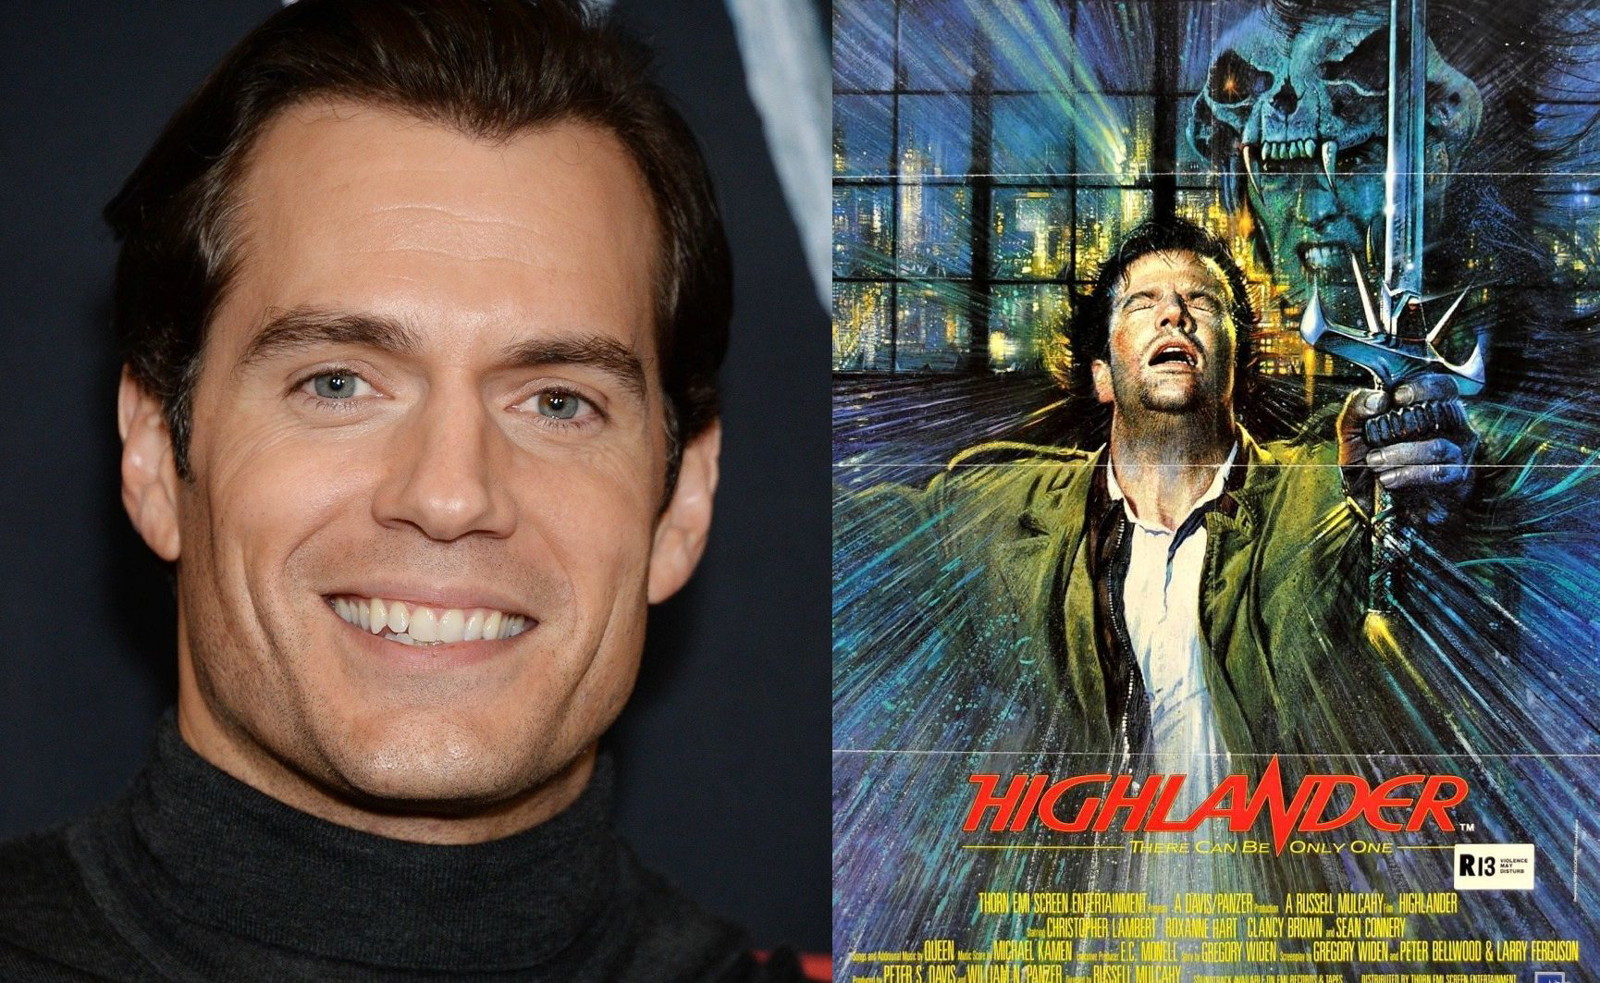 Henry Cavill is set to star in the Highlander reboot!